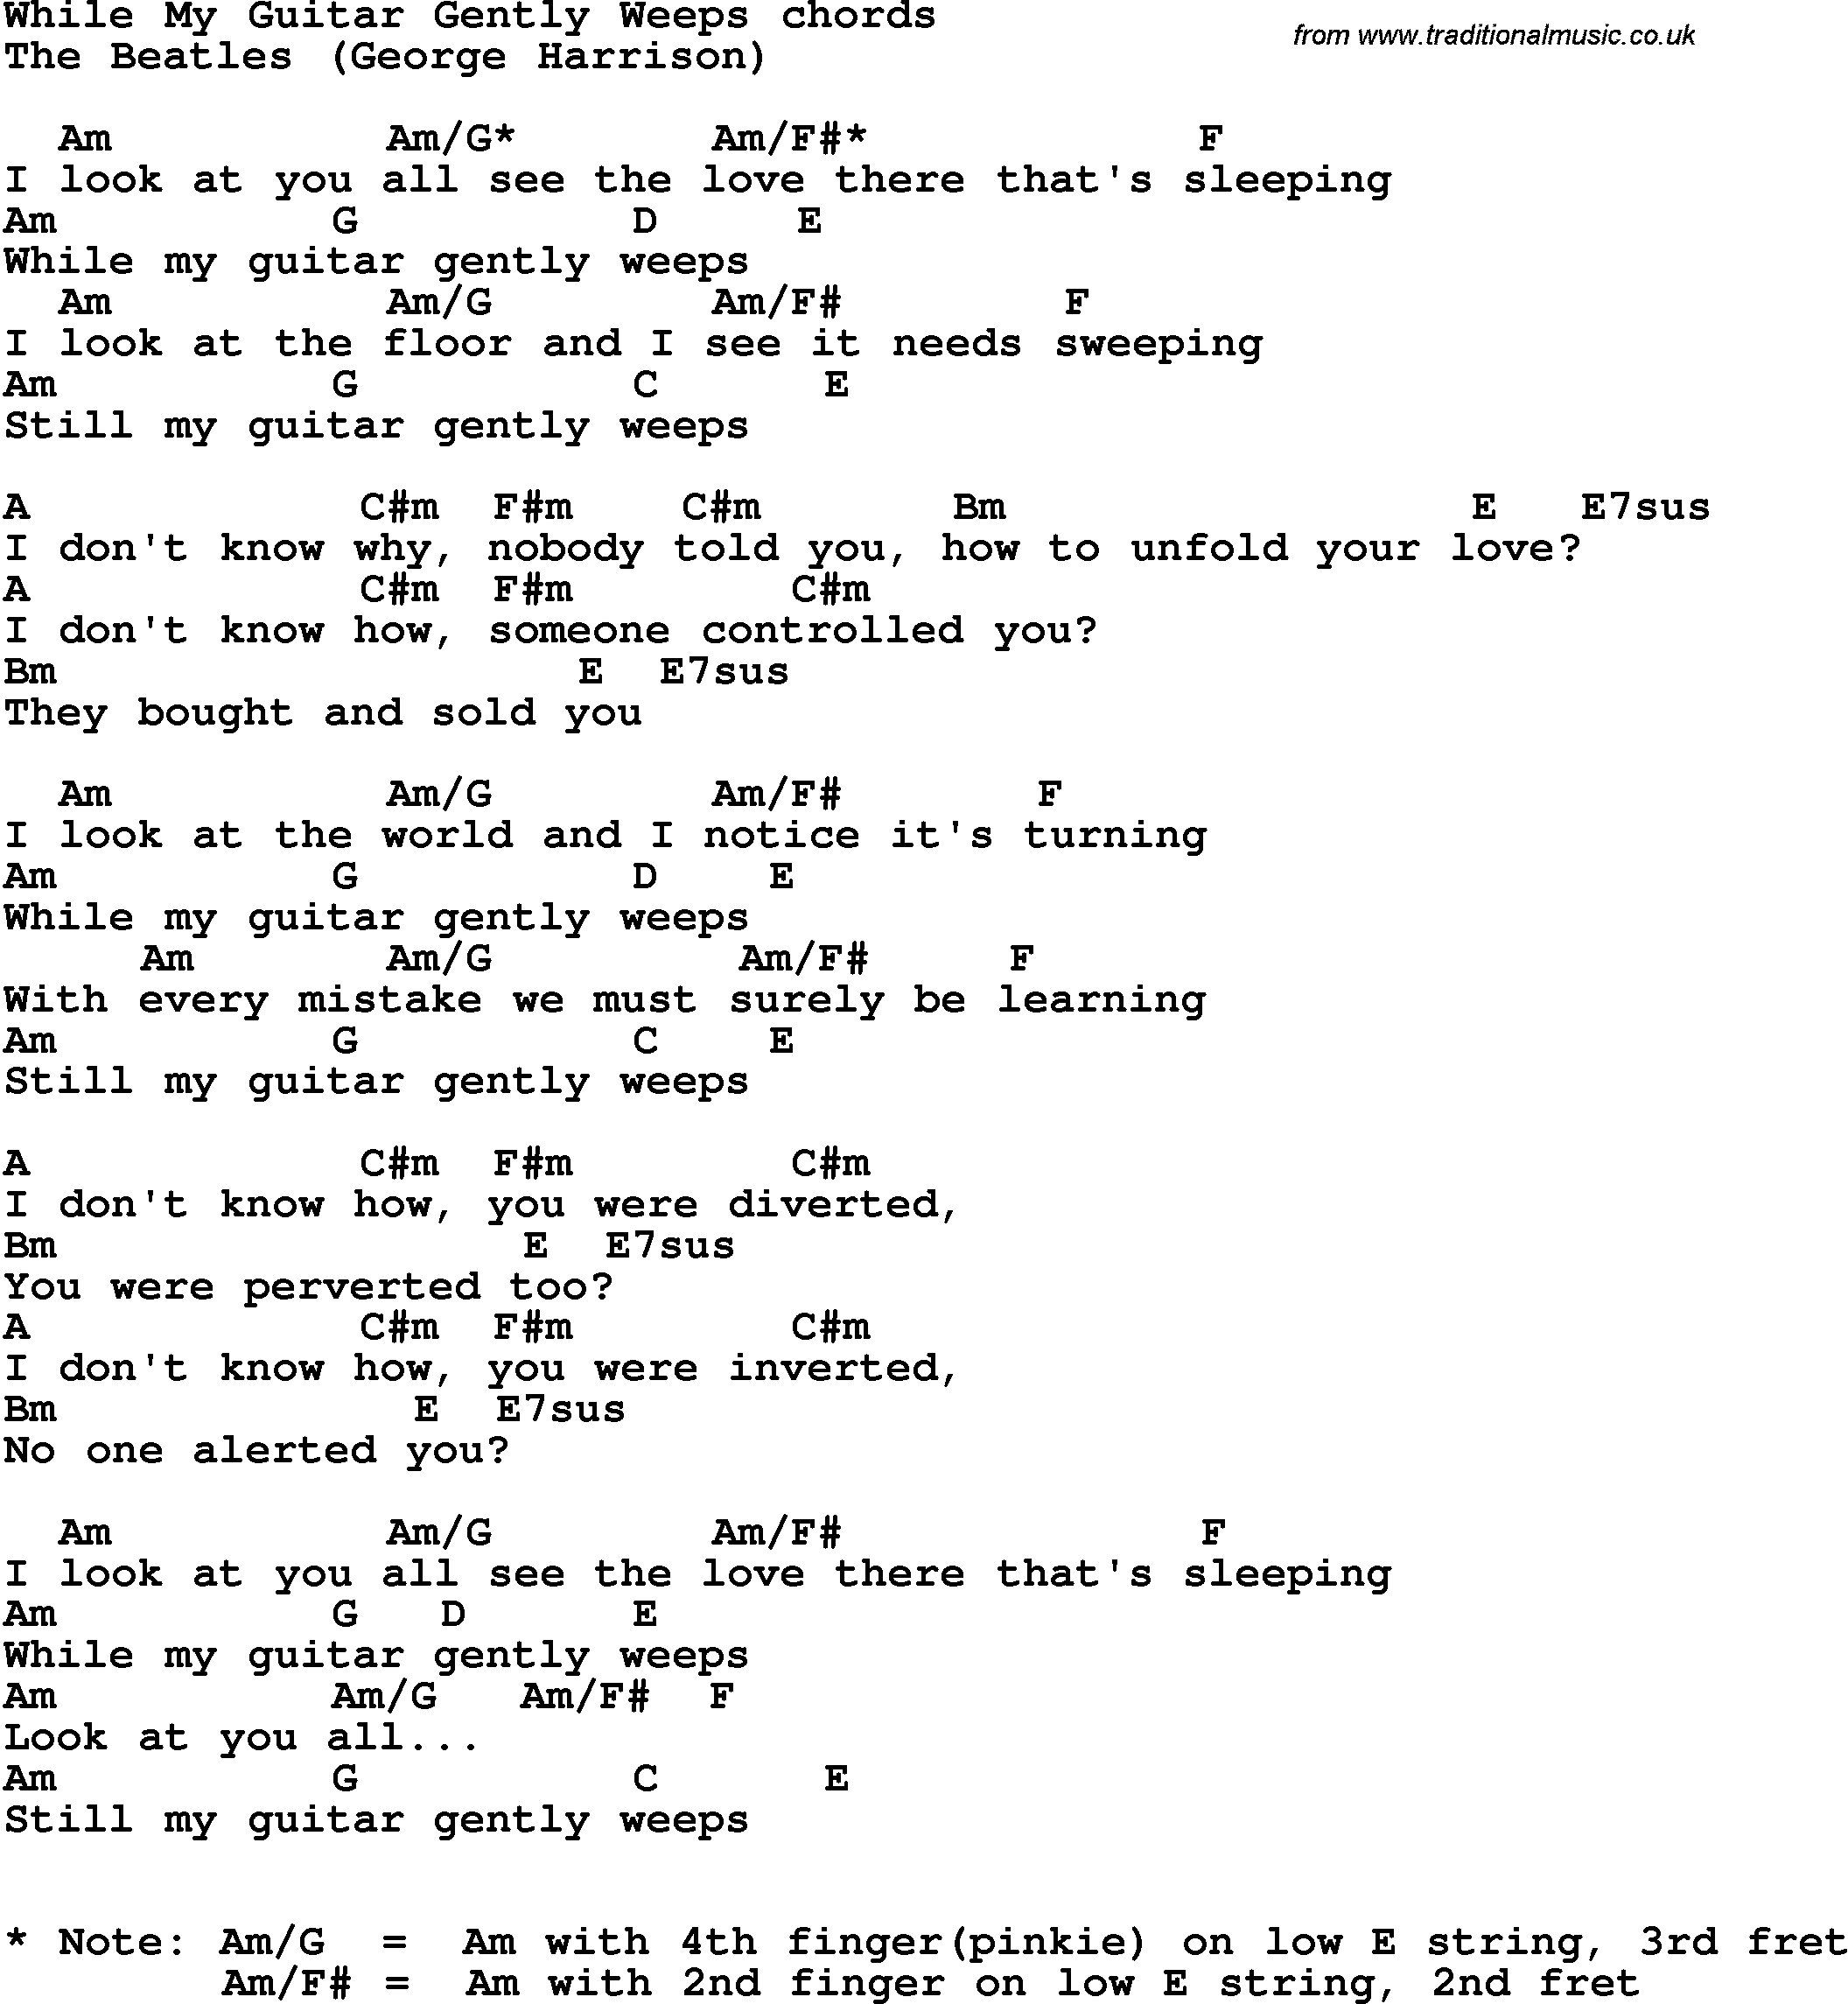 emulering Rejse quagga Song lyrics with guitar chords for While My Guitar Gently Weeps